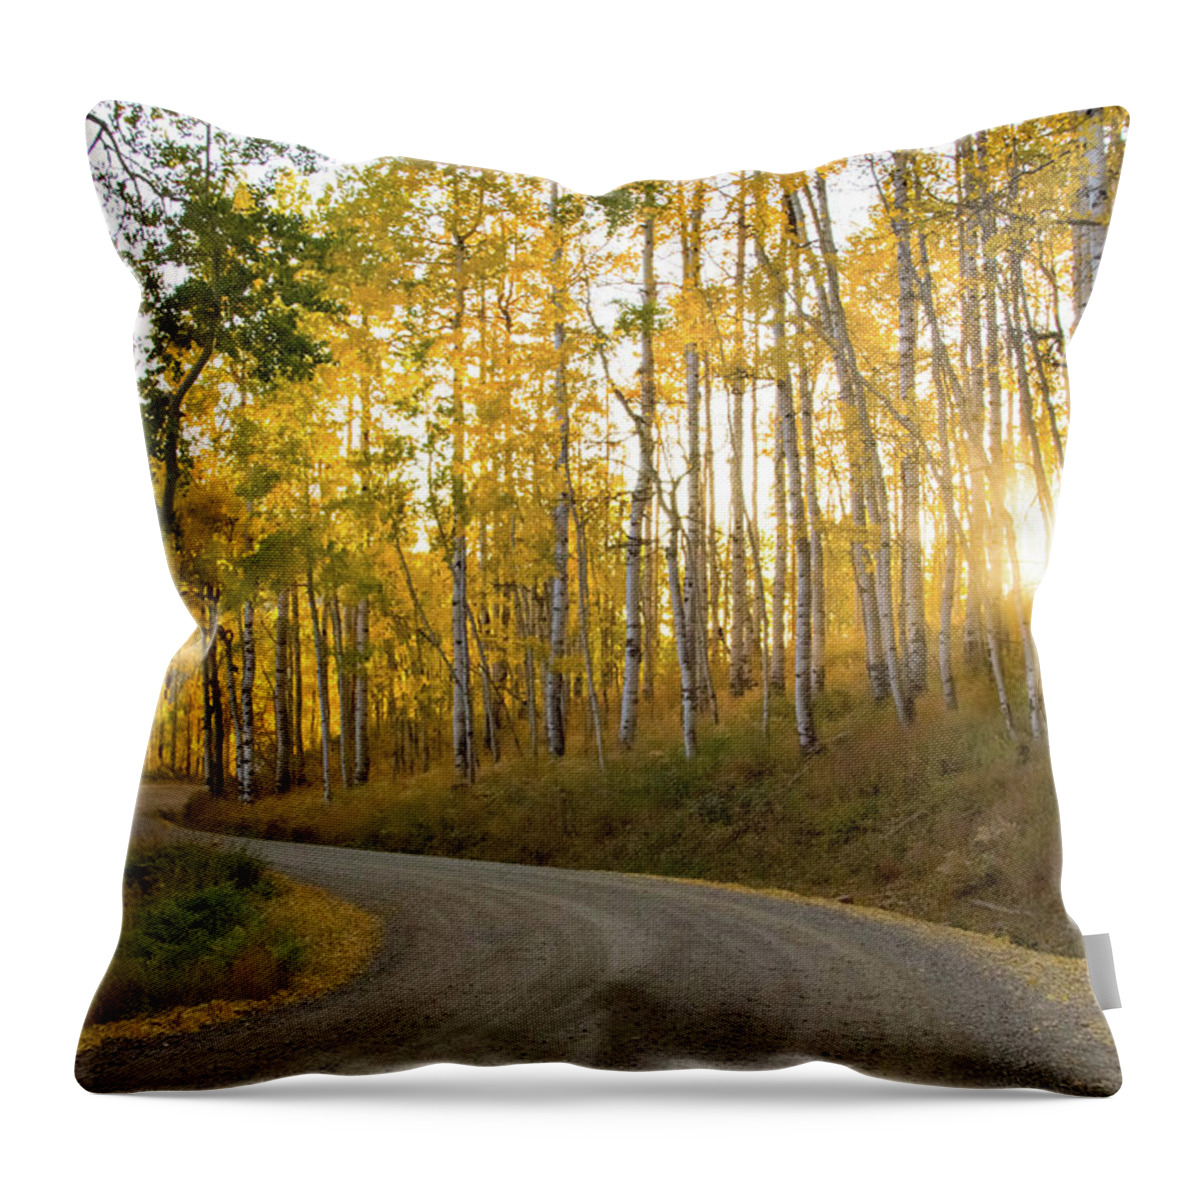 Colorado Throw Pillow featuring the photograph Winding Road by Wesley Aston